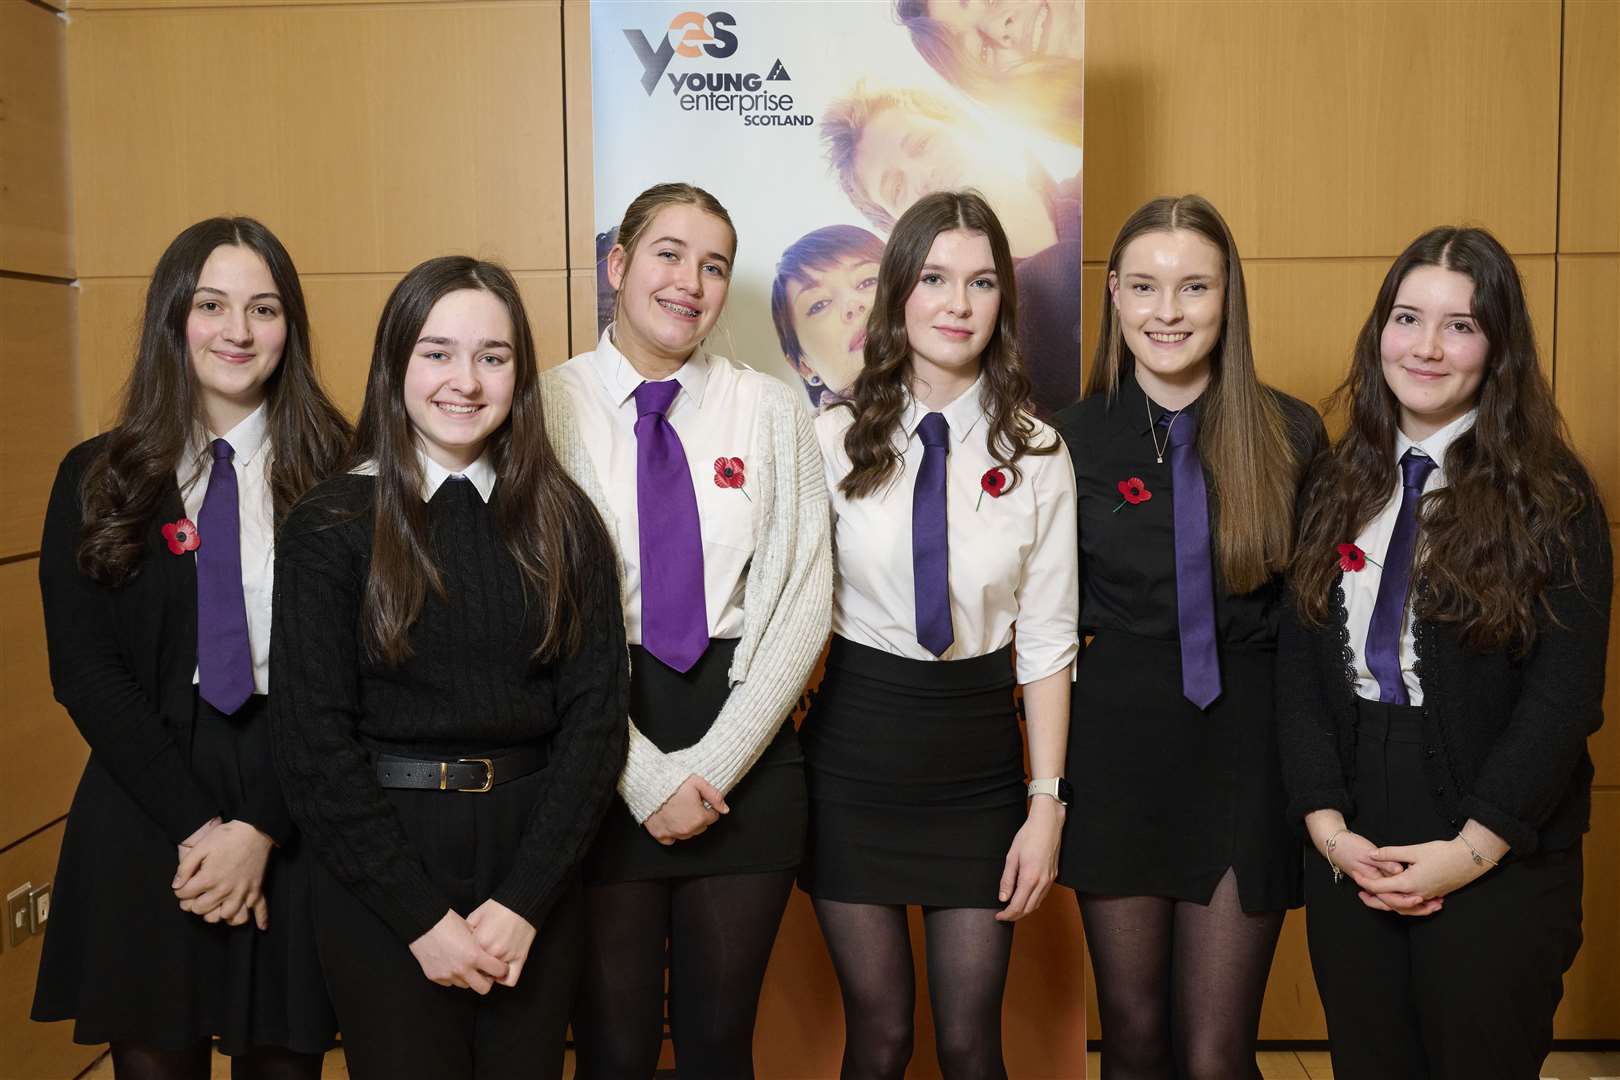 Culloden Academy. From left: Lois Maton, Sophie Kennedy, Lily Craig-Gould, Ella Hornley, Ellie Smith, Jessica Streeter-Smith.